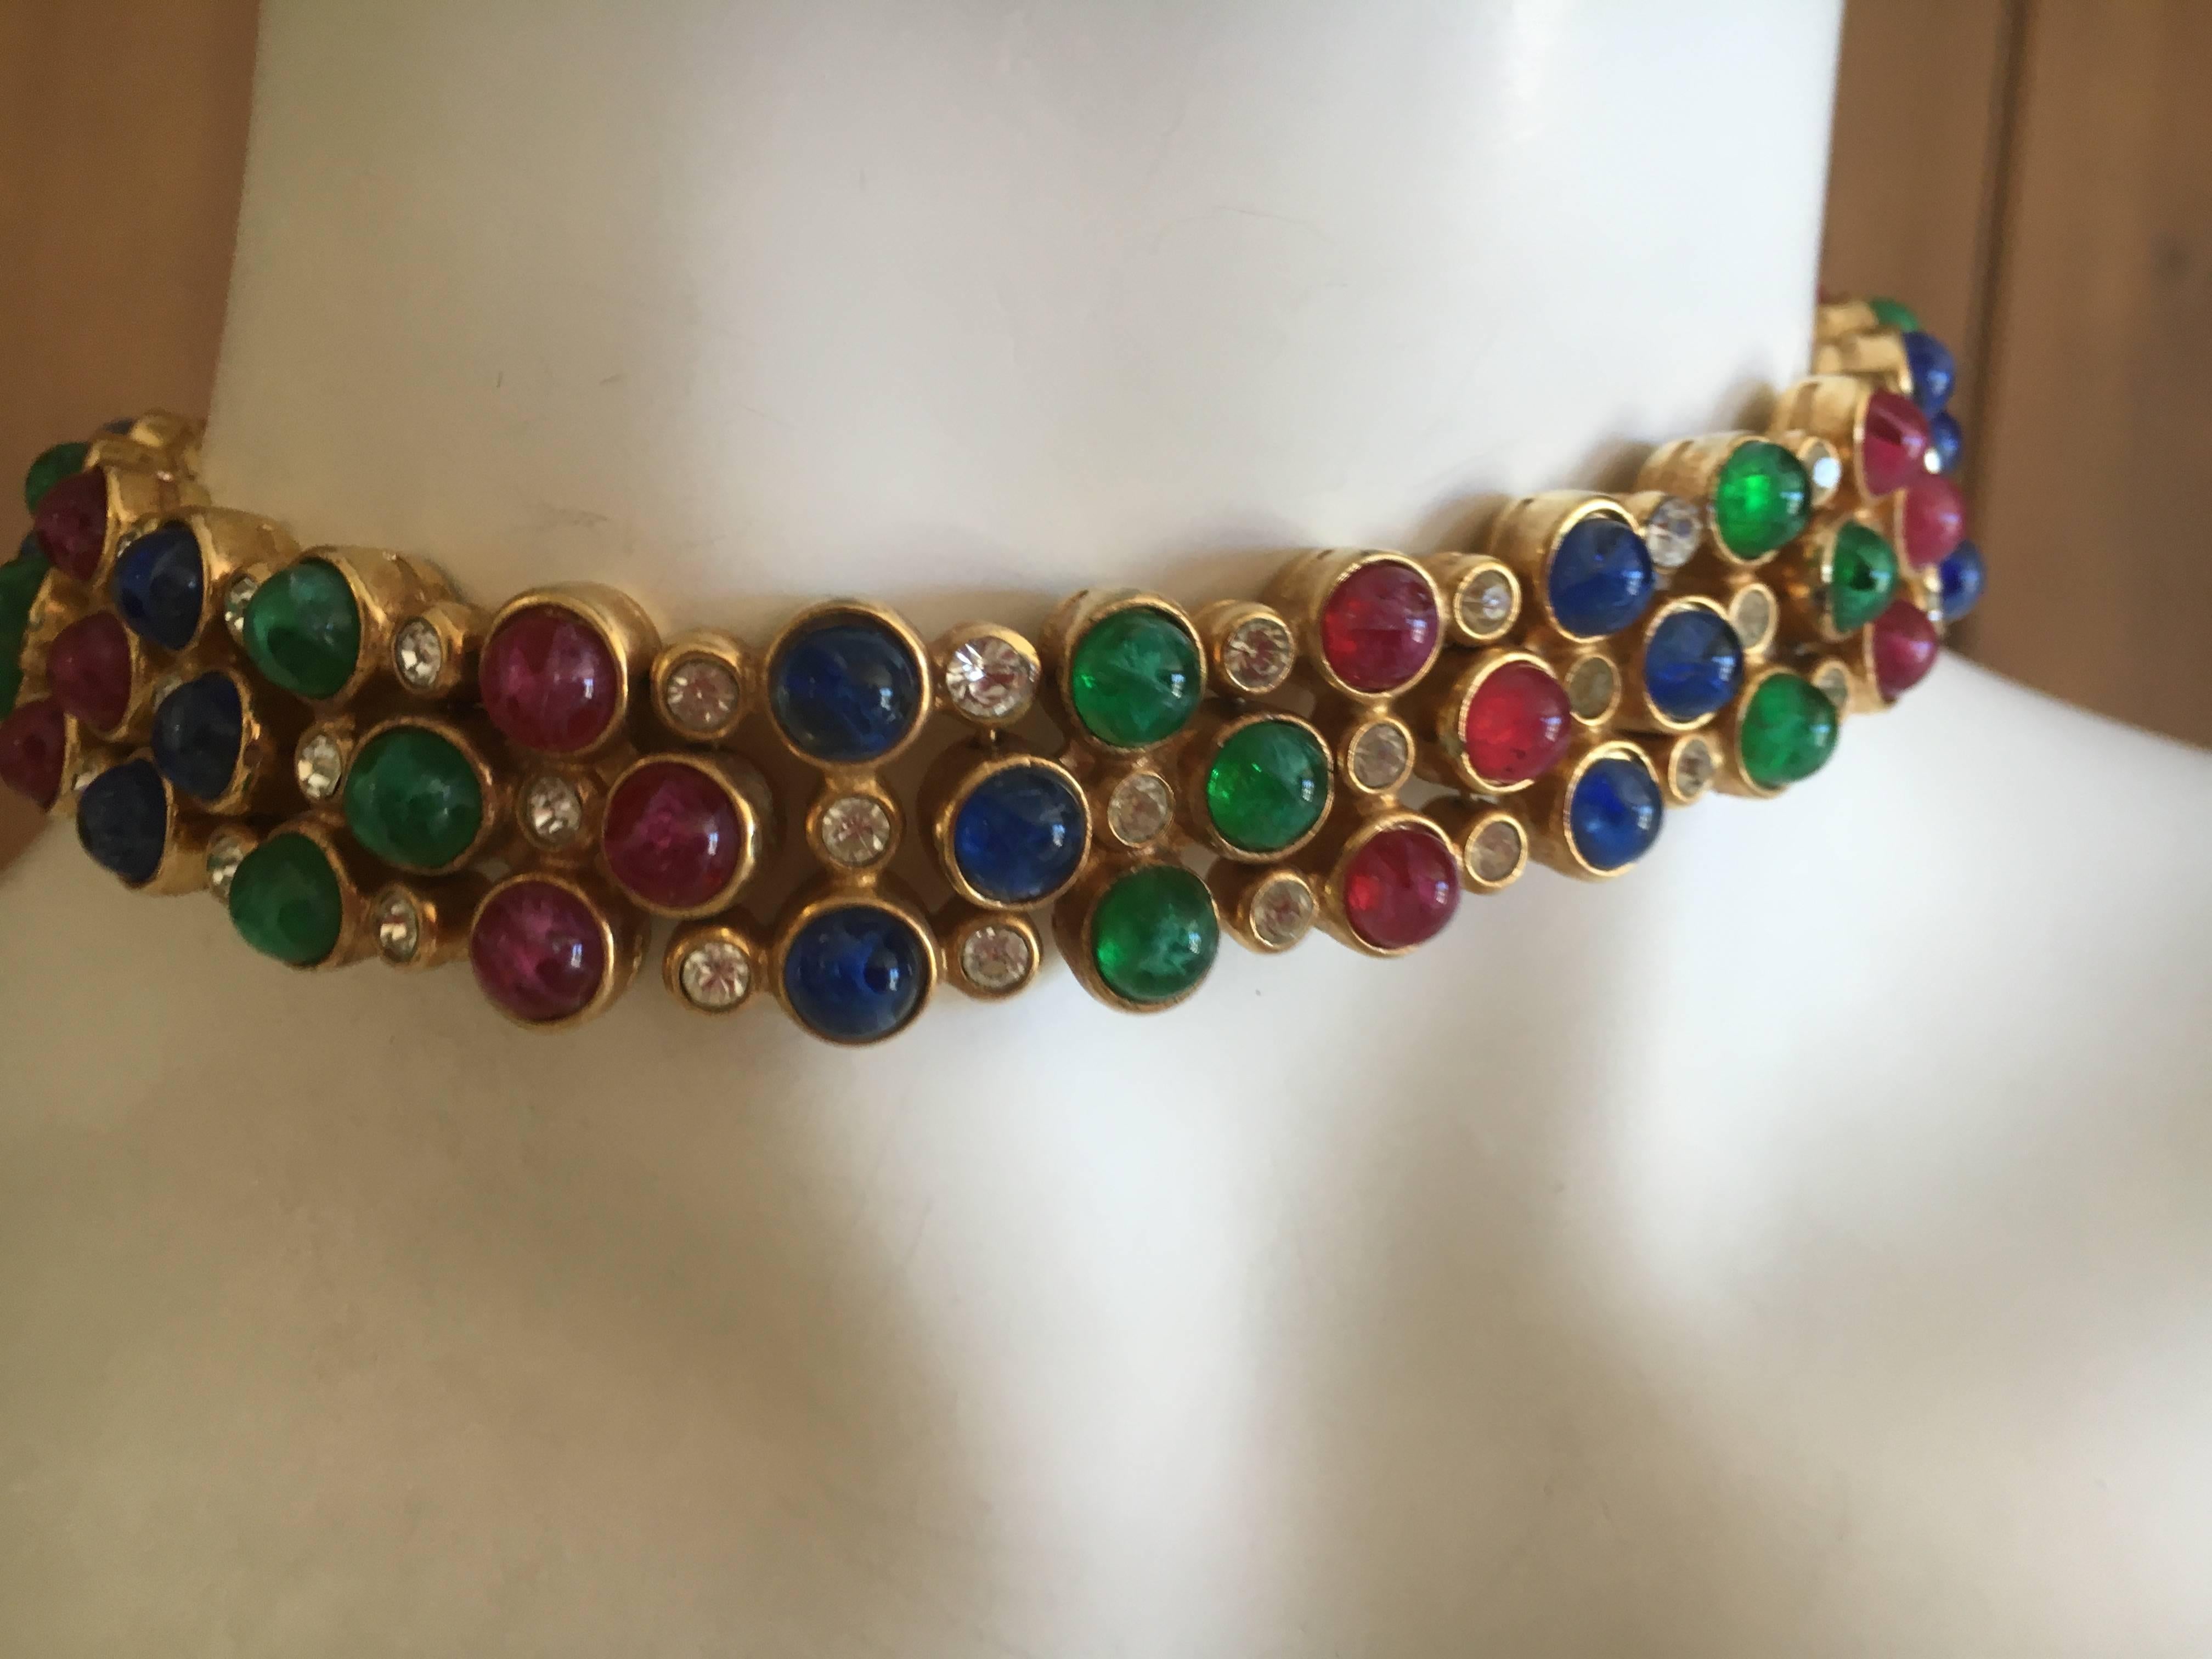 Christian Dior 1960's Tutti Fruity Cabochon Choker from Grosse Germany.
Jewel tones of red green and blue set in gold13"
long with an extender chain